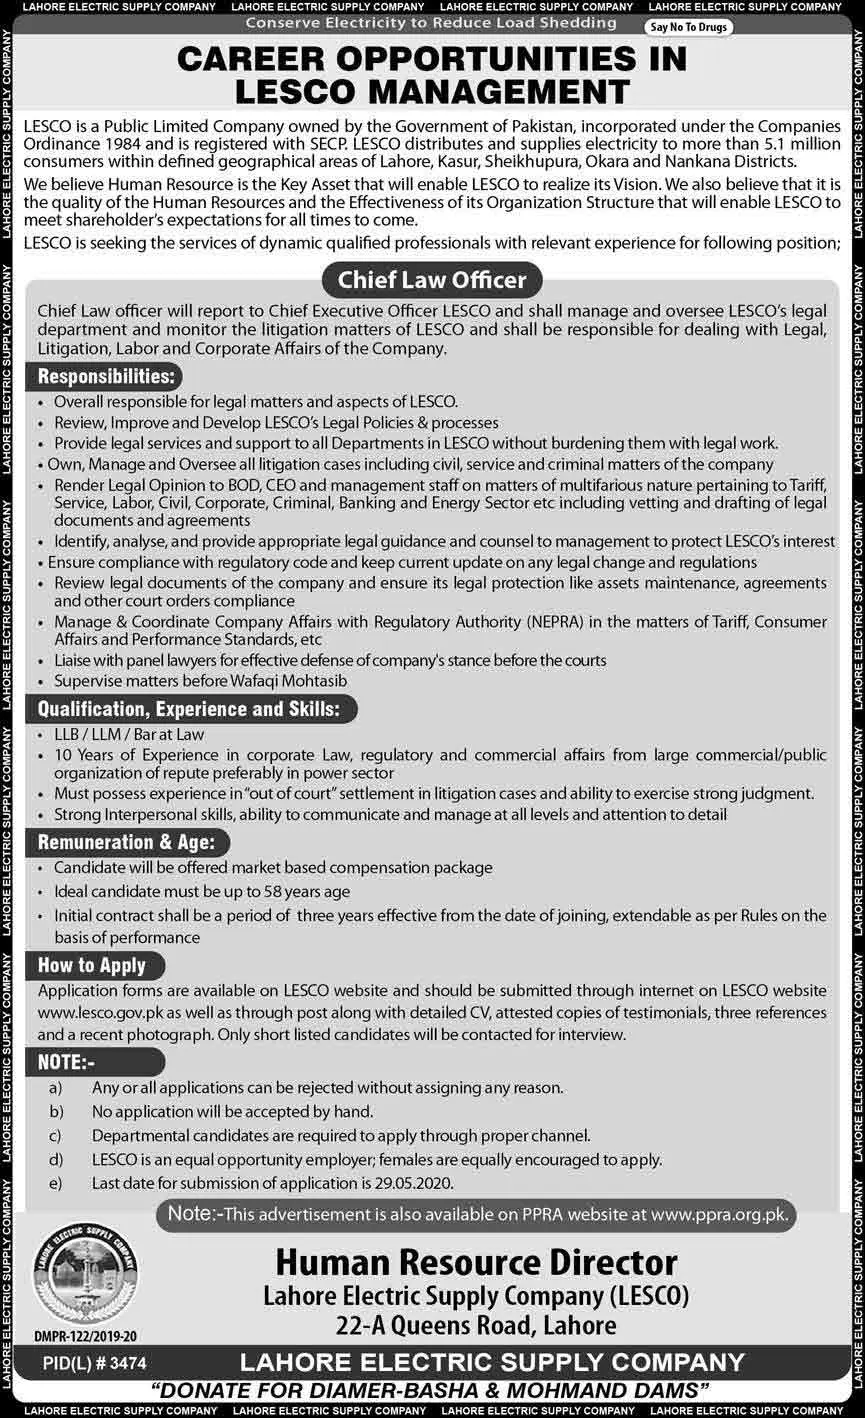 LESCO-Lahore-Jobs-2020-Chief-Law-Officer